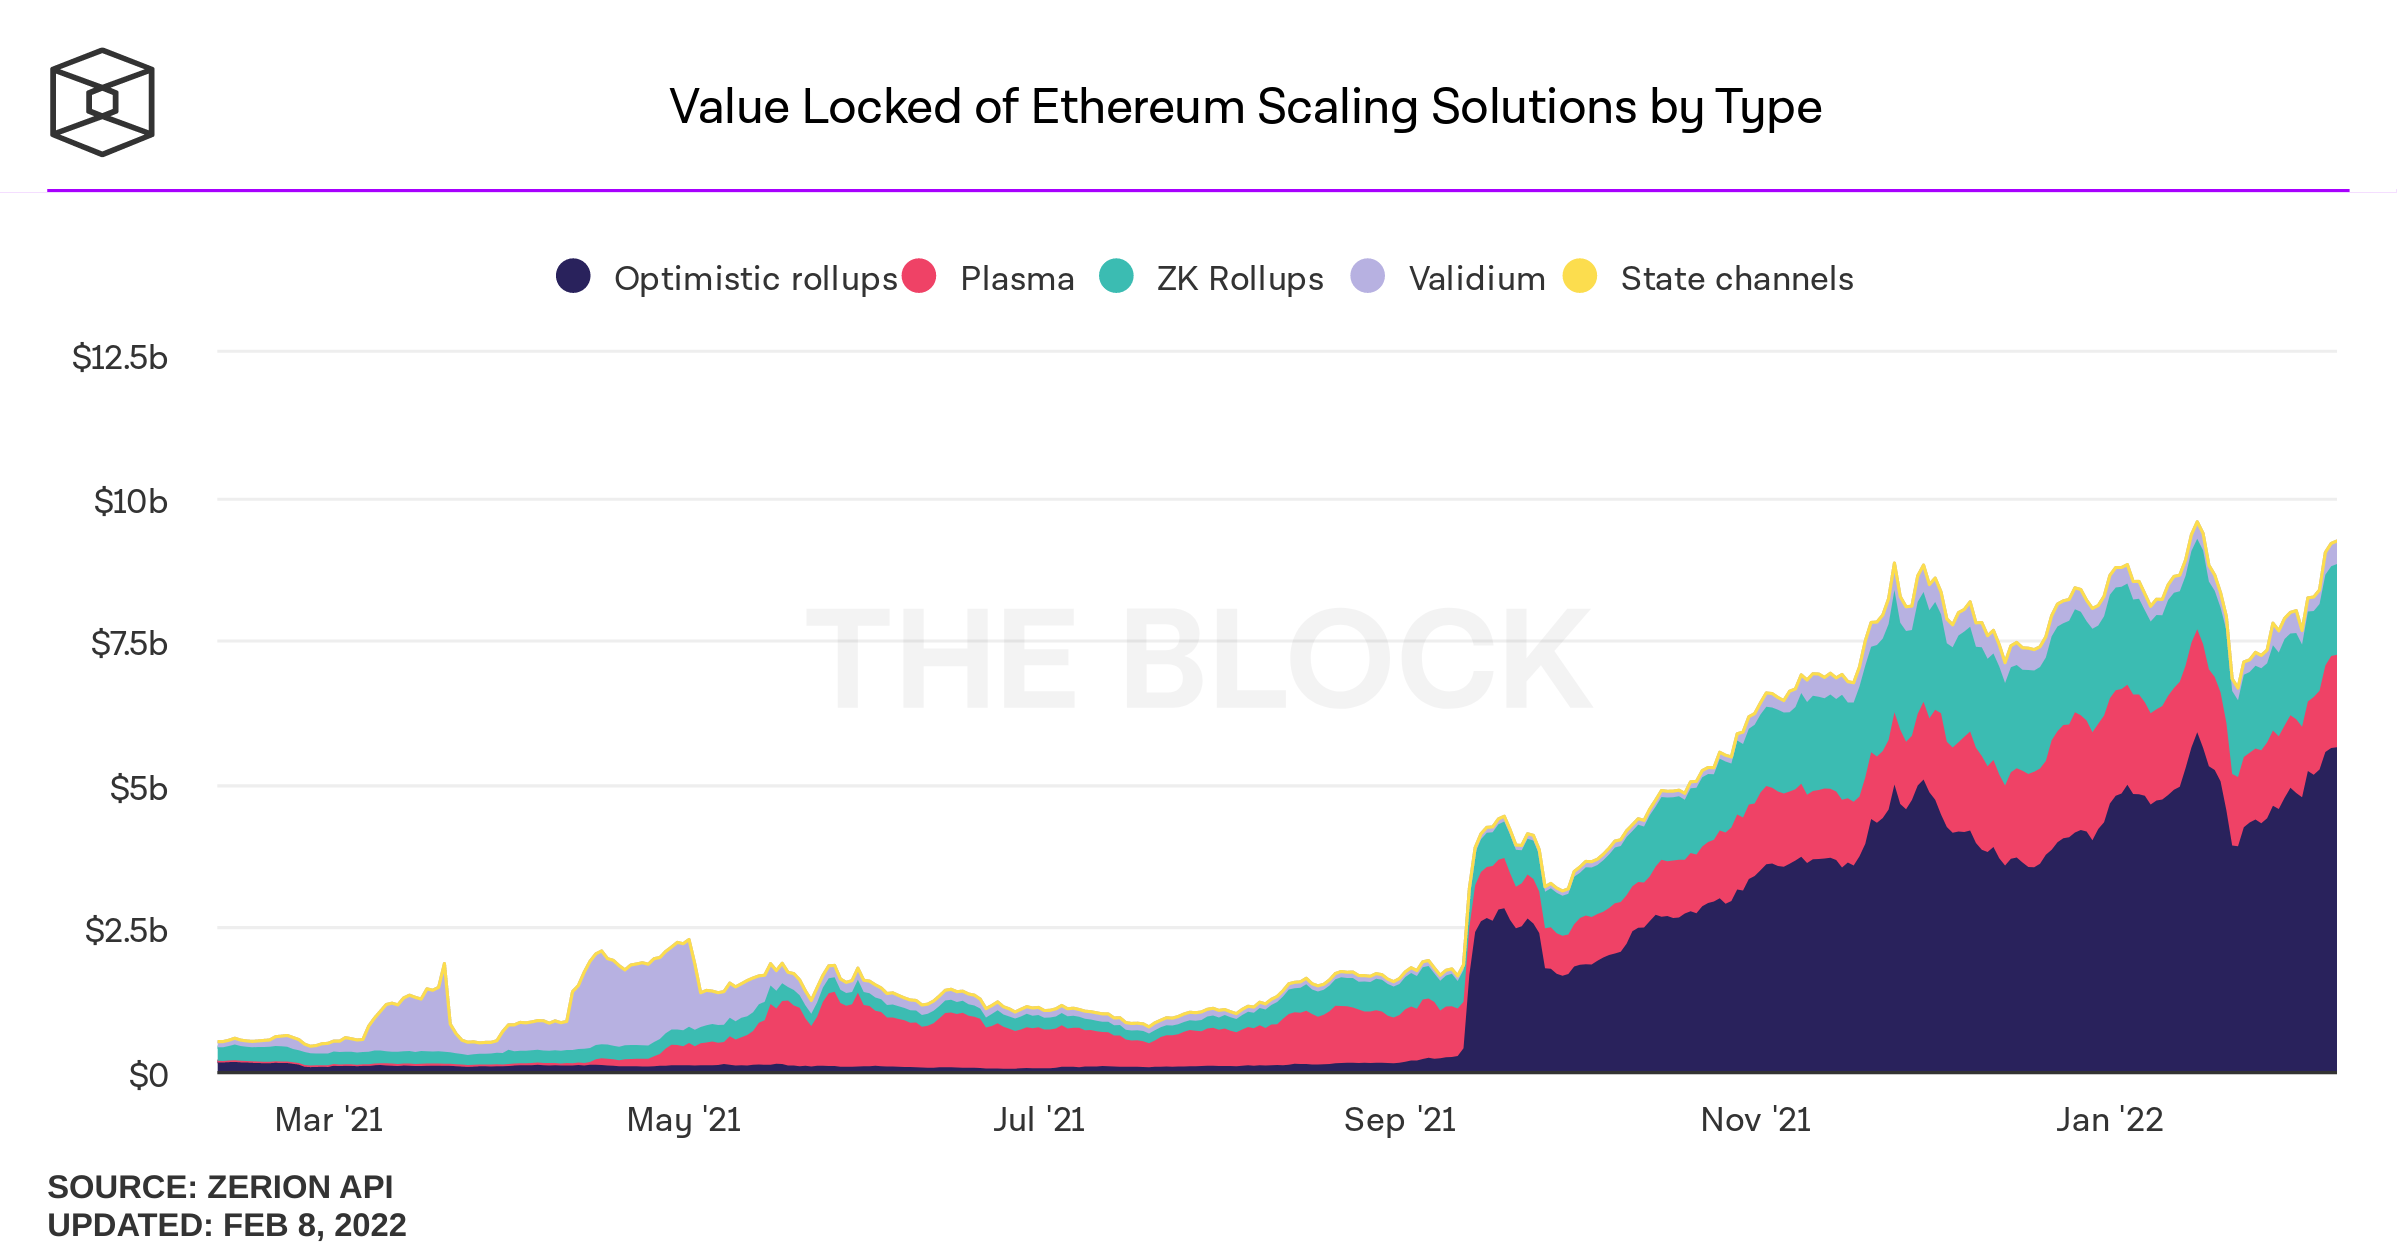 https://www.theblockcrypto.com/data/scaling-solutions/scaling-overview